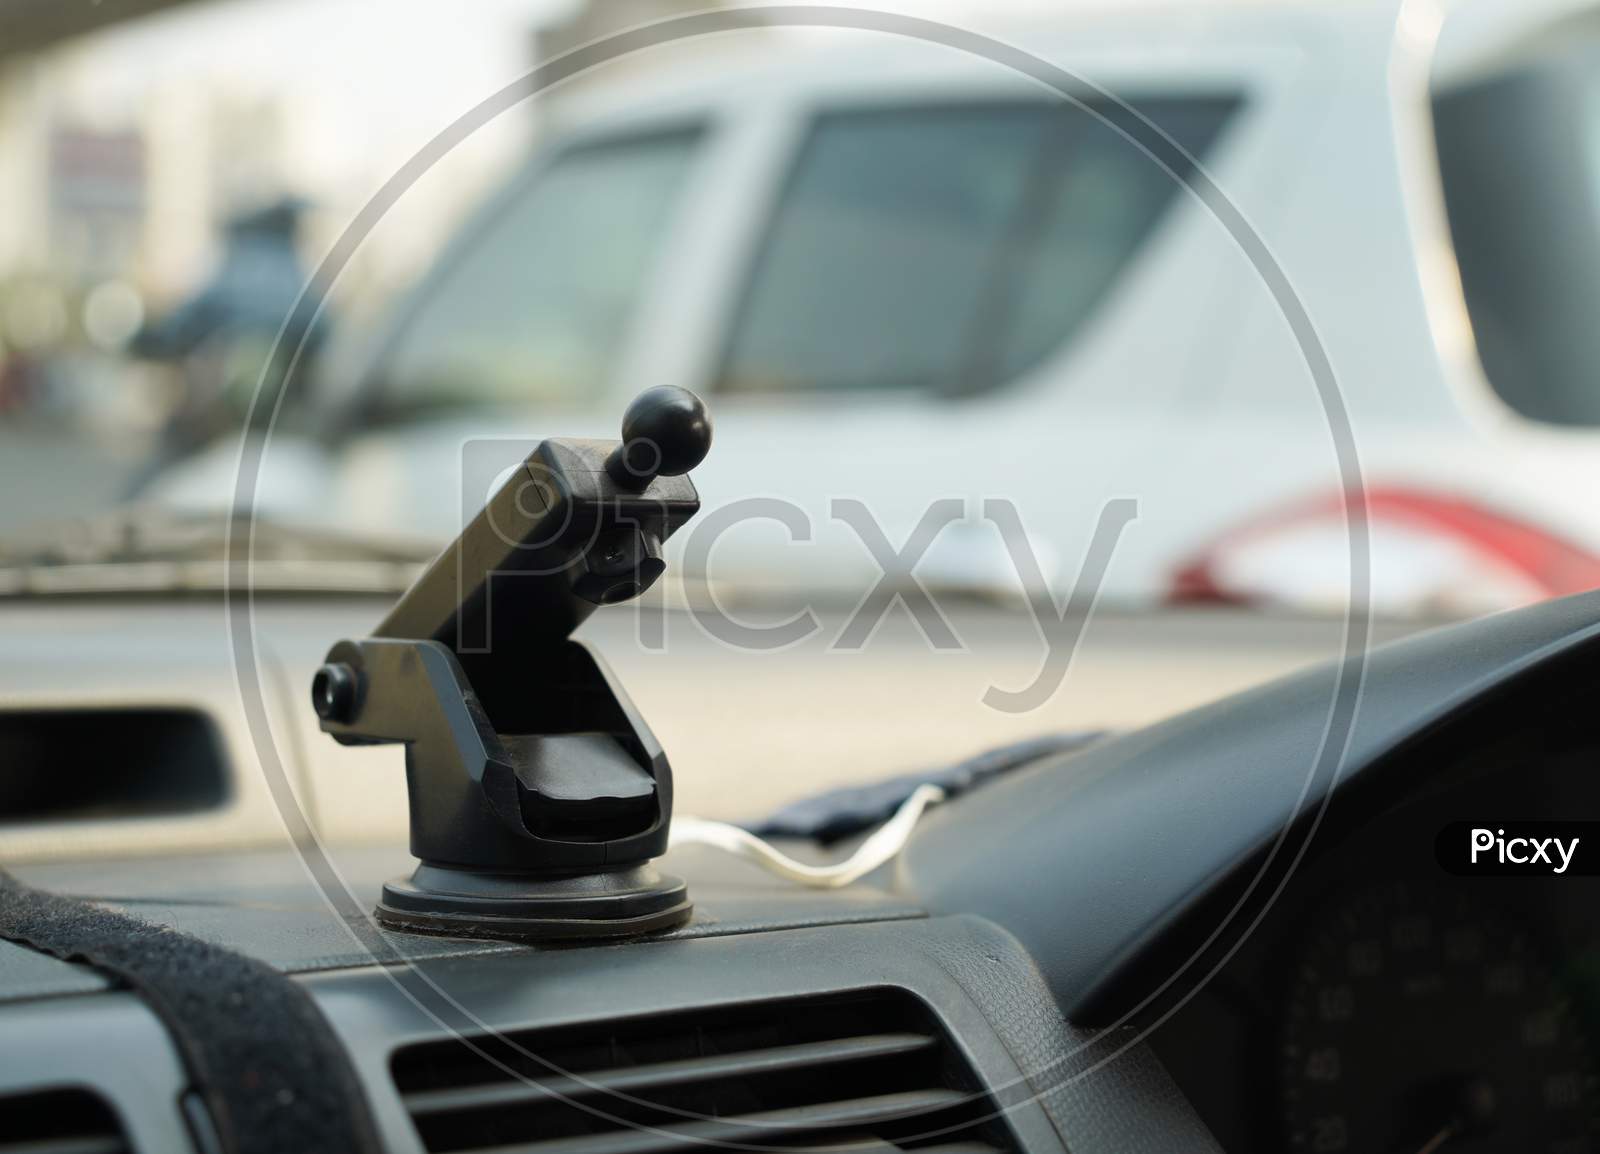 A Mobile Phone Holder In Dashboard Of A Car With Ball Joint System For Navigation